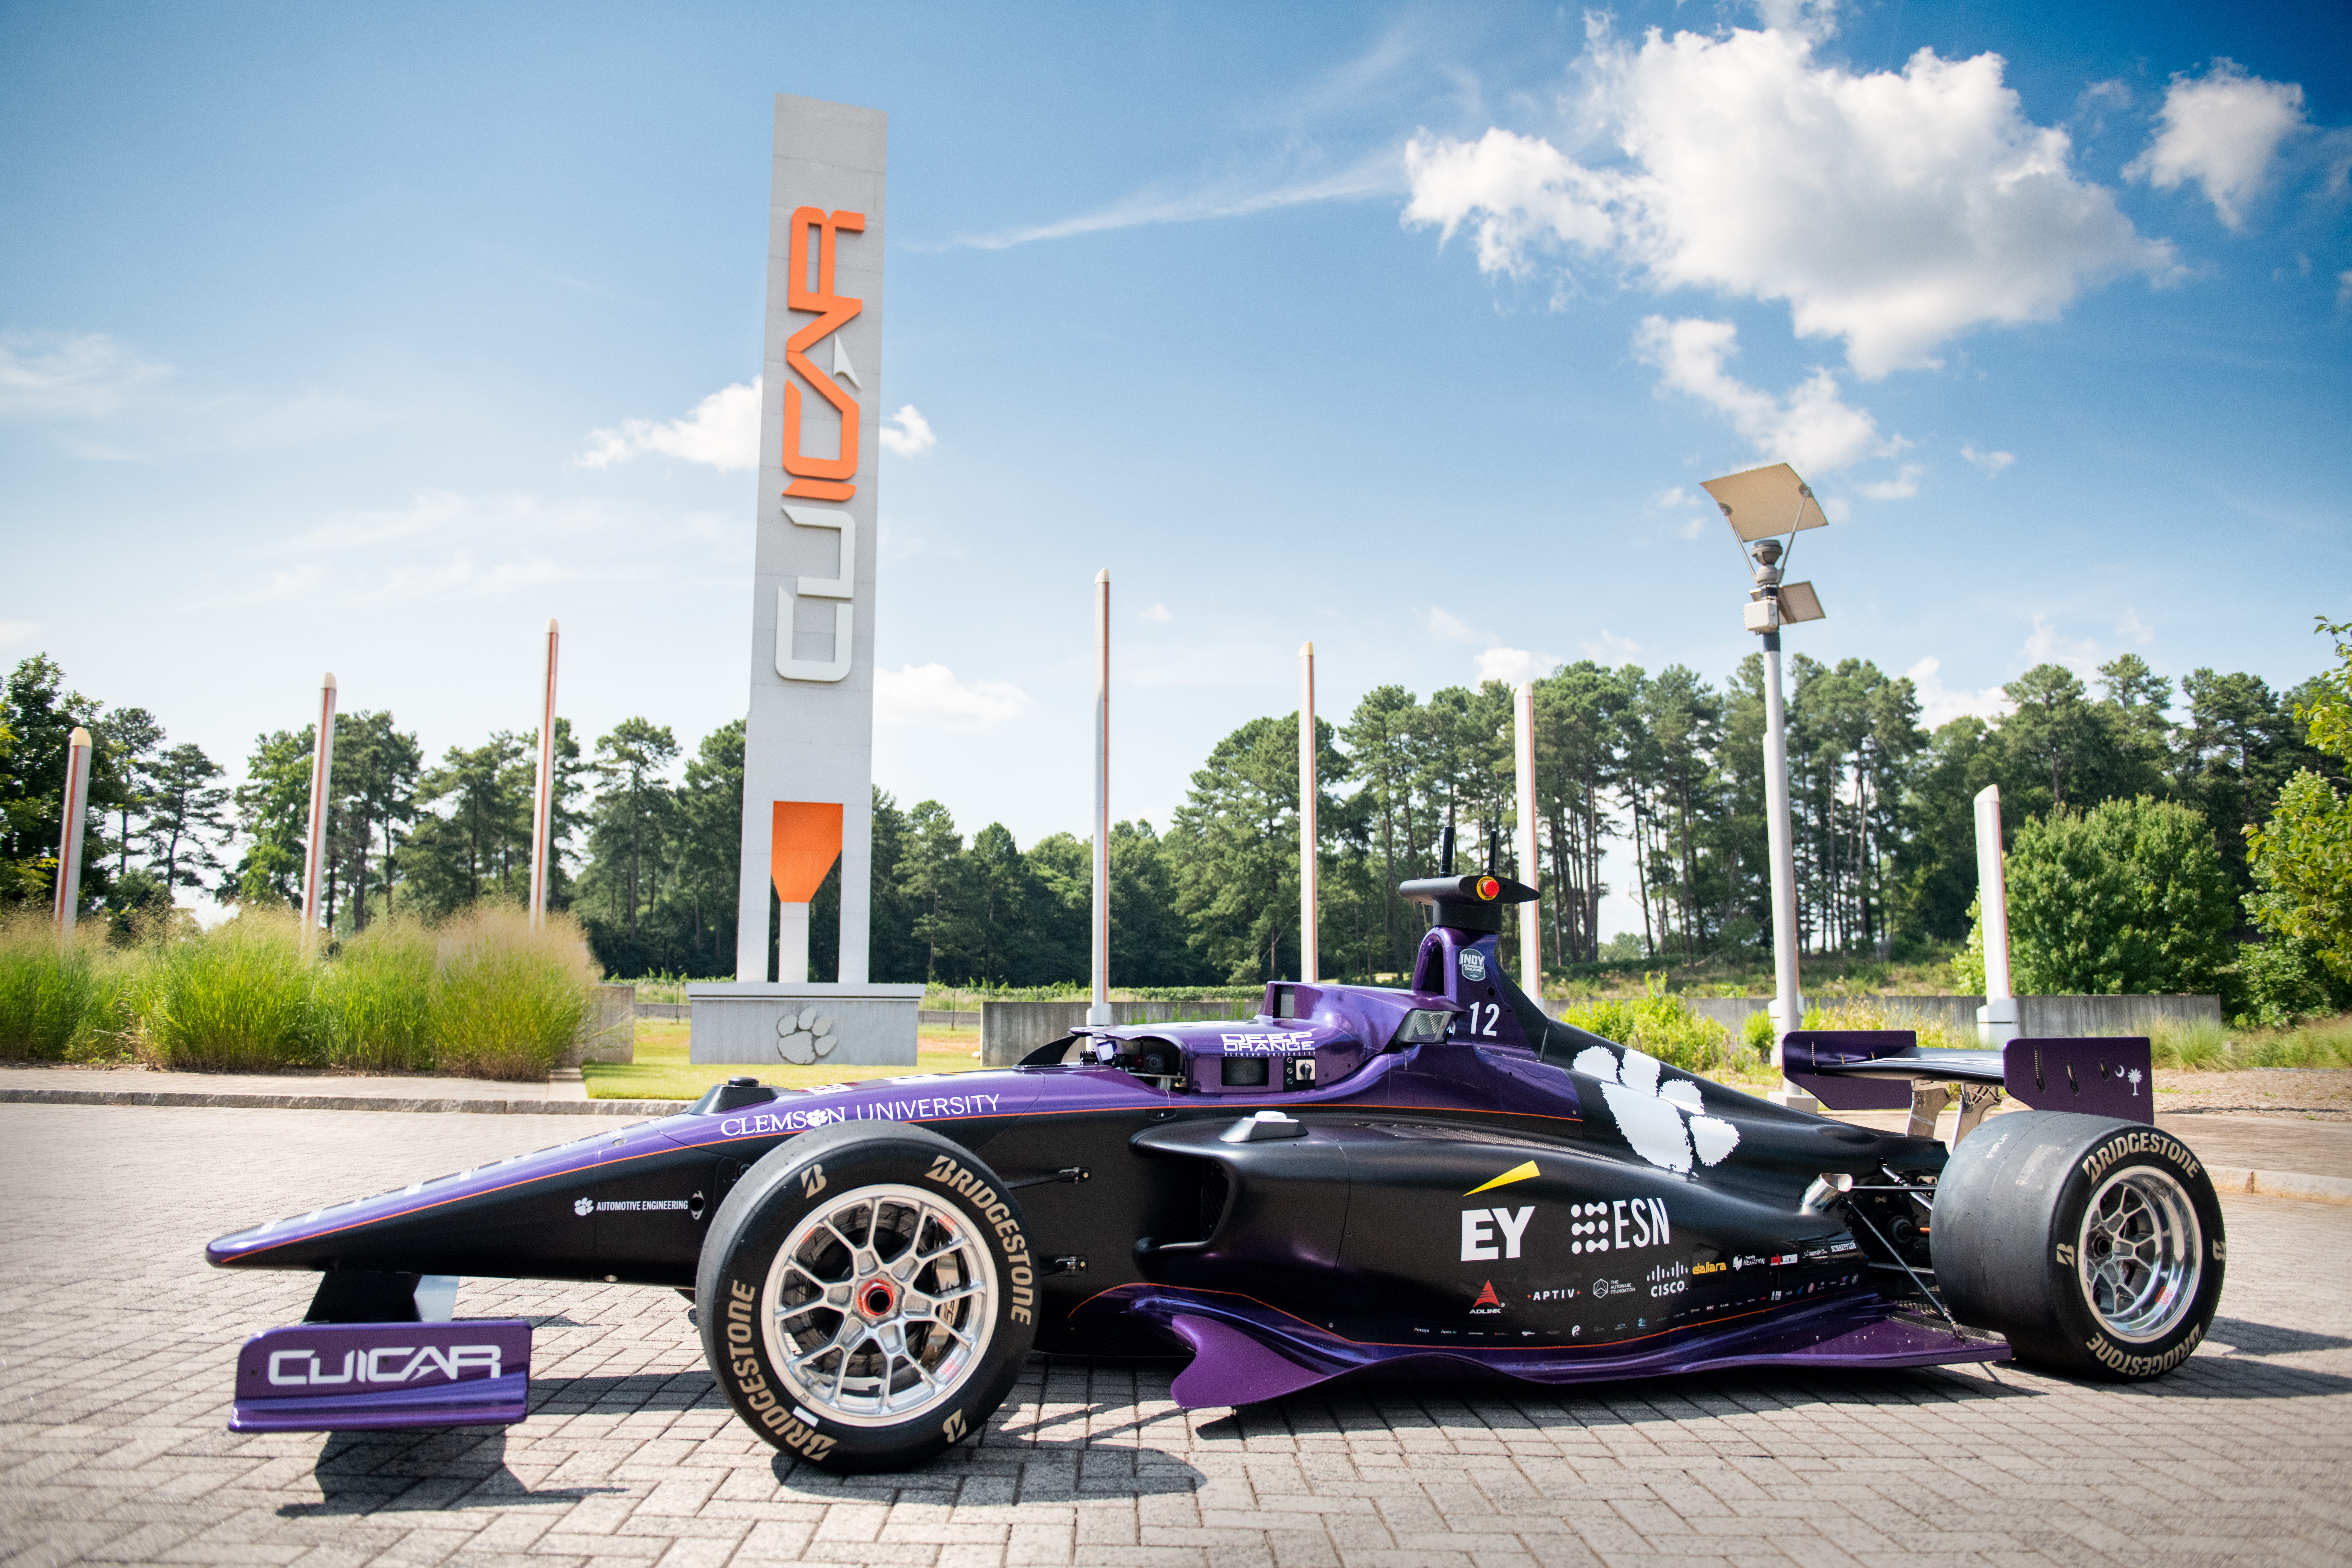 A futuristic race car that is purple and emblazoned with numerous logos,  including some that read "Clemson," "CUICAR" and "EY" is parked on an outdoor brick paver concourse with a CUICAR sign in the background. 